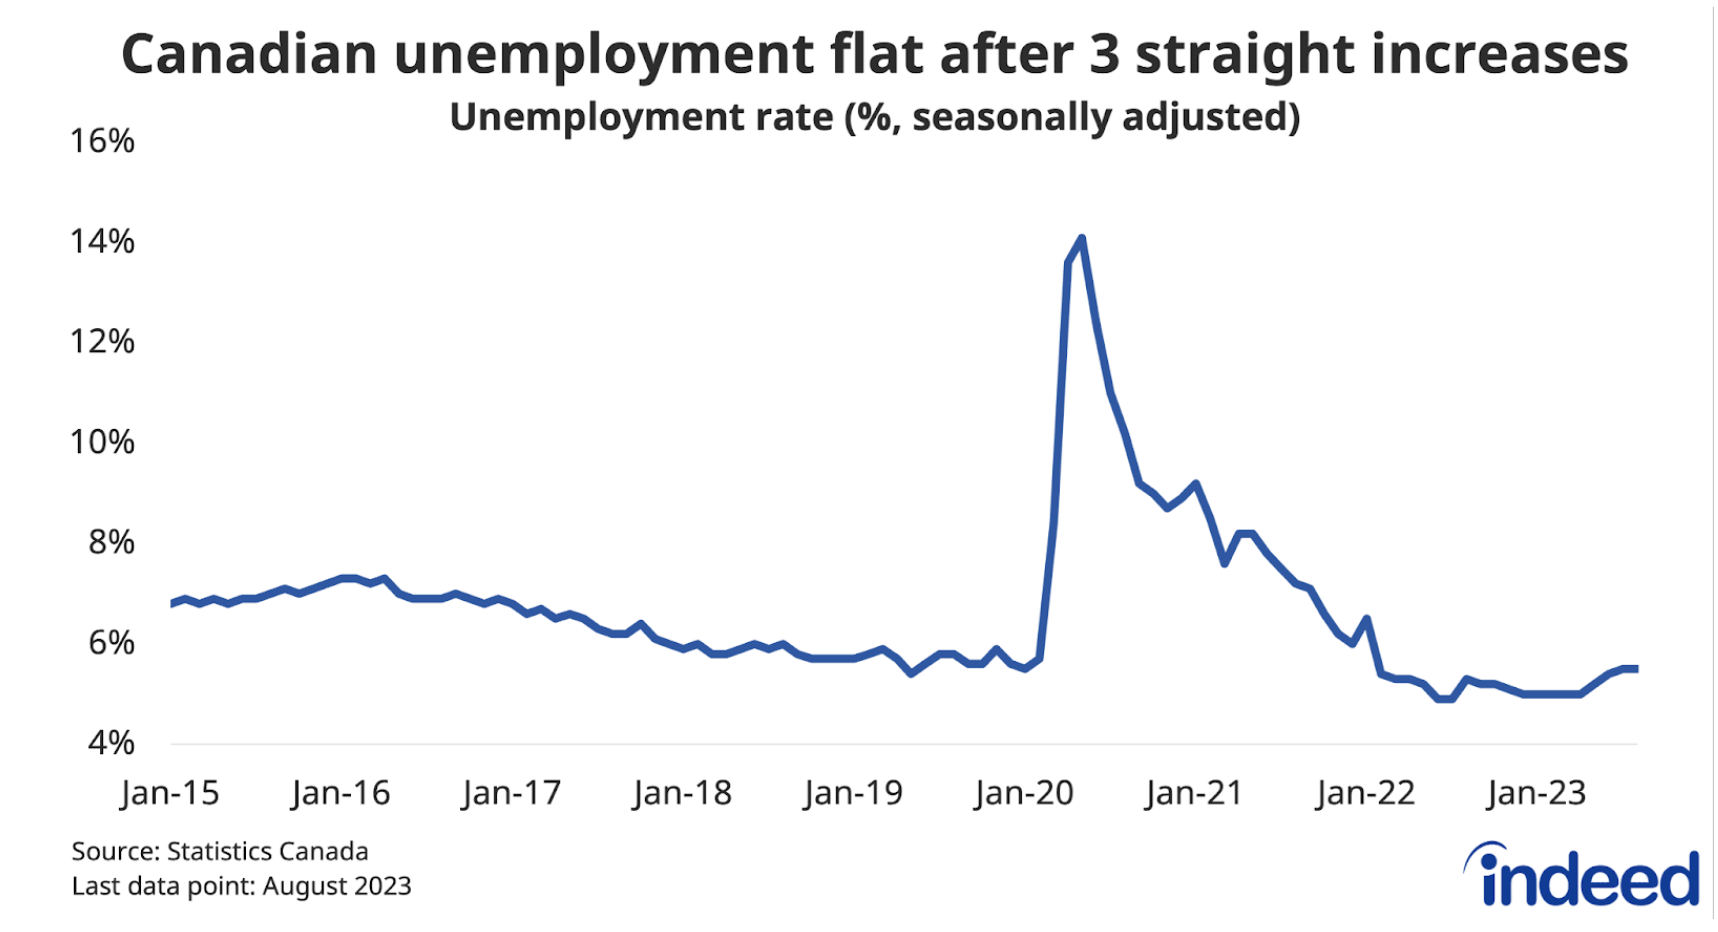 Line chart titled “Canadian unemployment flat after 3 straight increases” shows the Canadian unemployment rate between January 2015 and August 2023. The unemployment rate held steady at 5.5% in August, after rising from 5.0% earlier in the year.